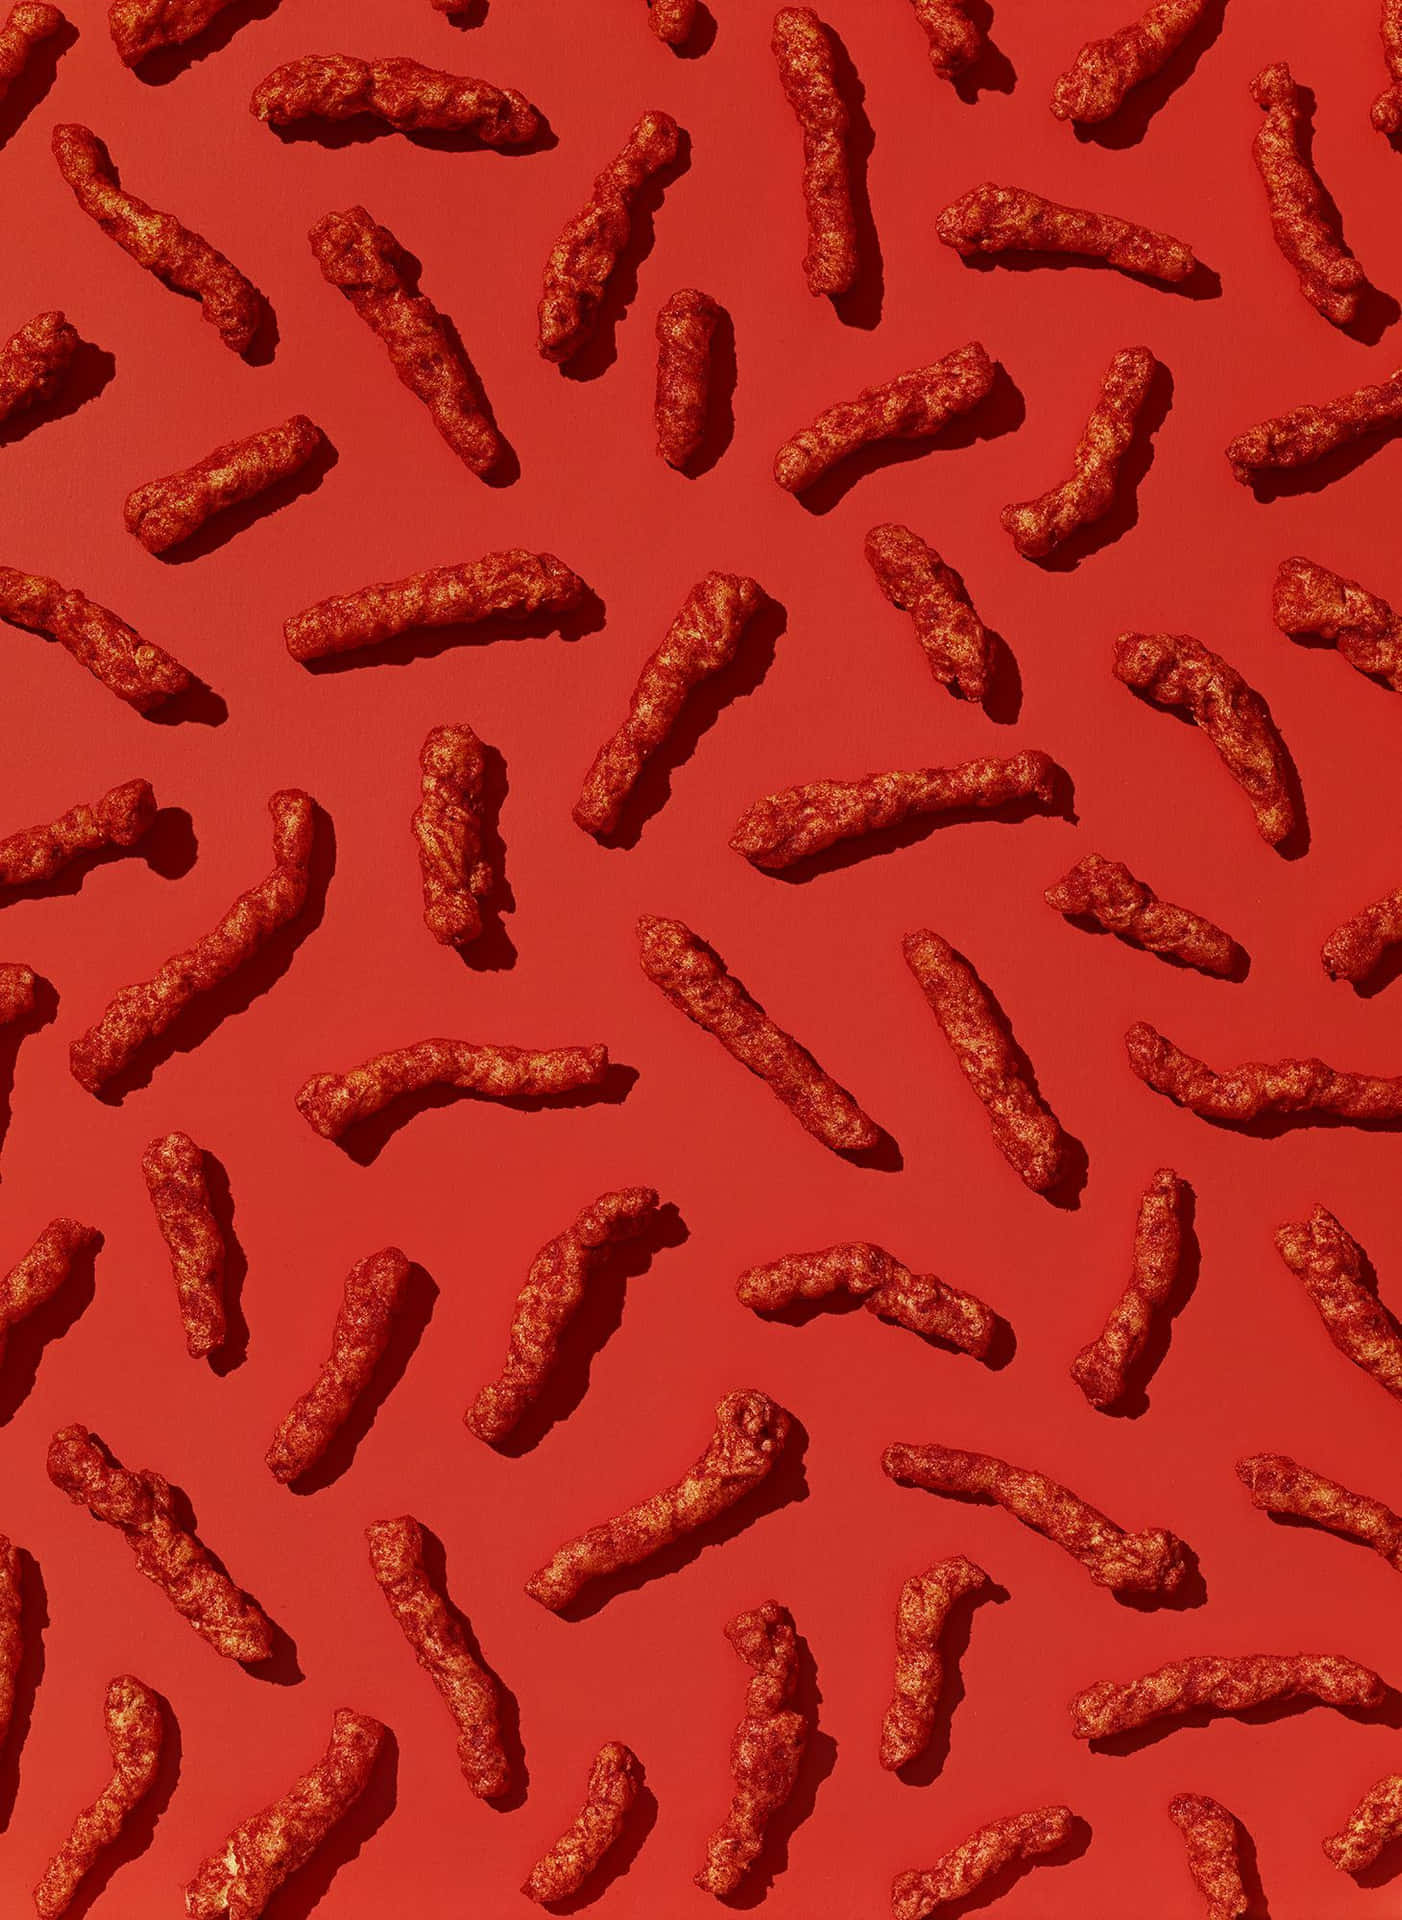 Add a Little Spice to Your Day With Hot Cheetos! Wallpaper